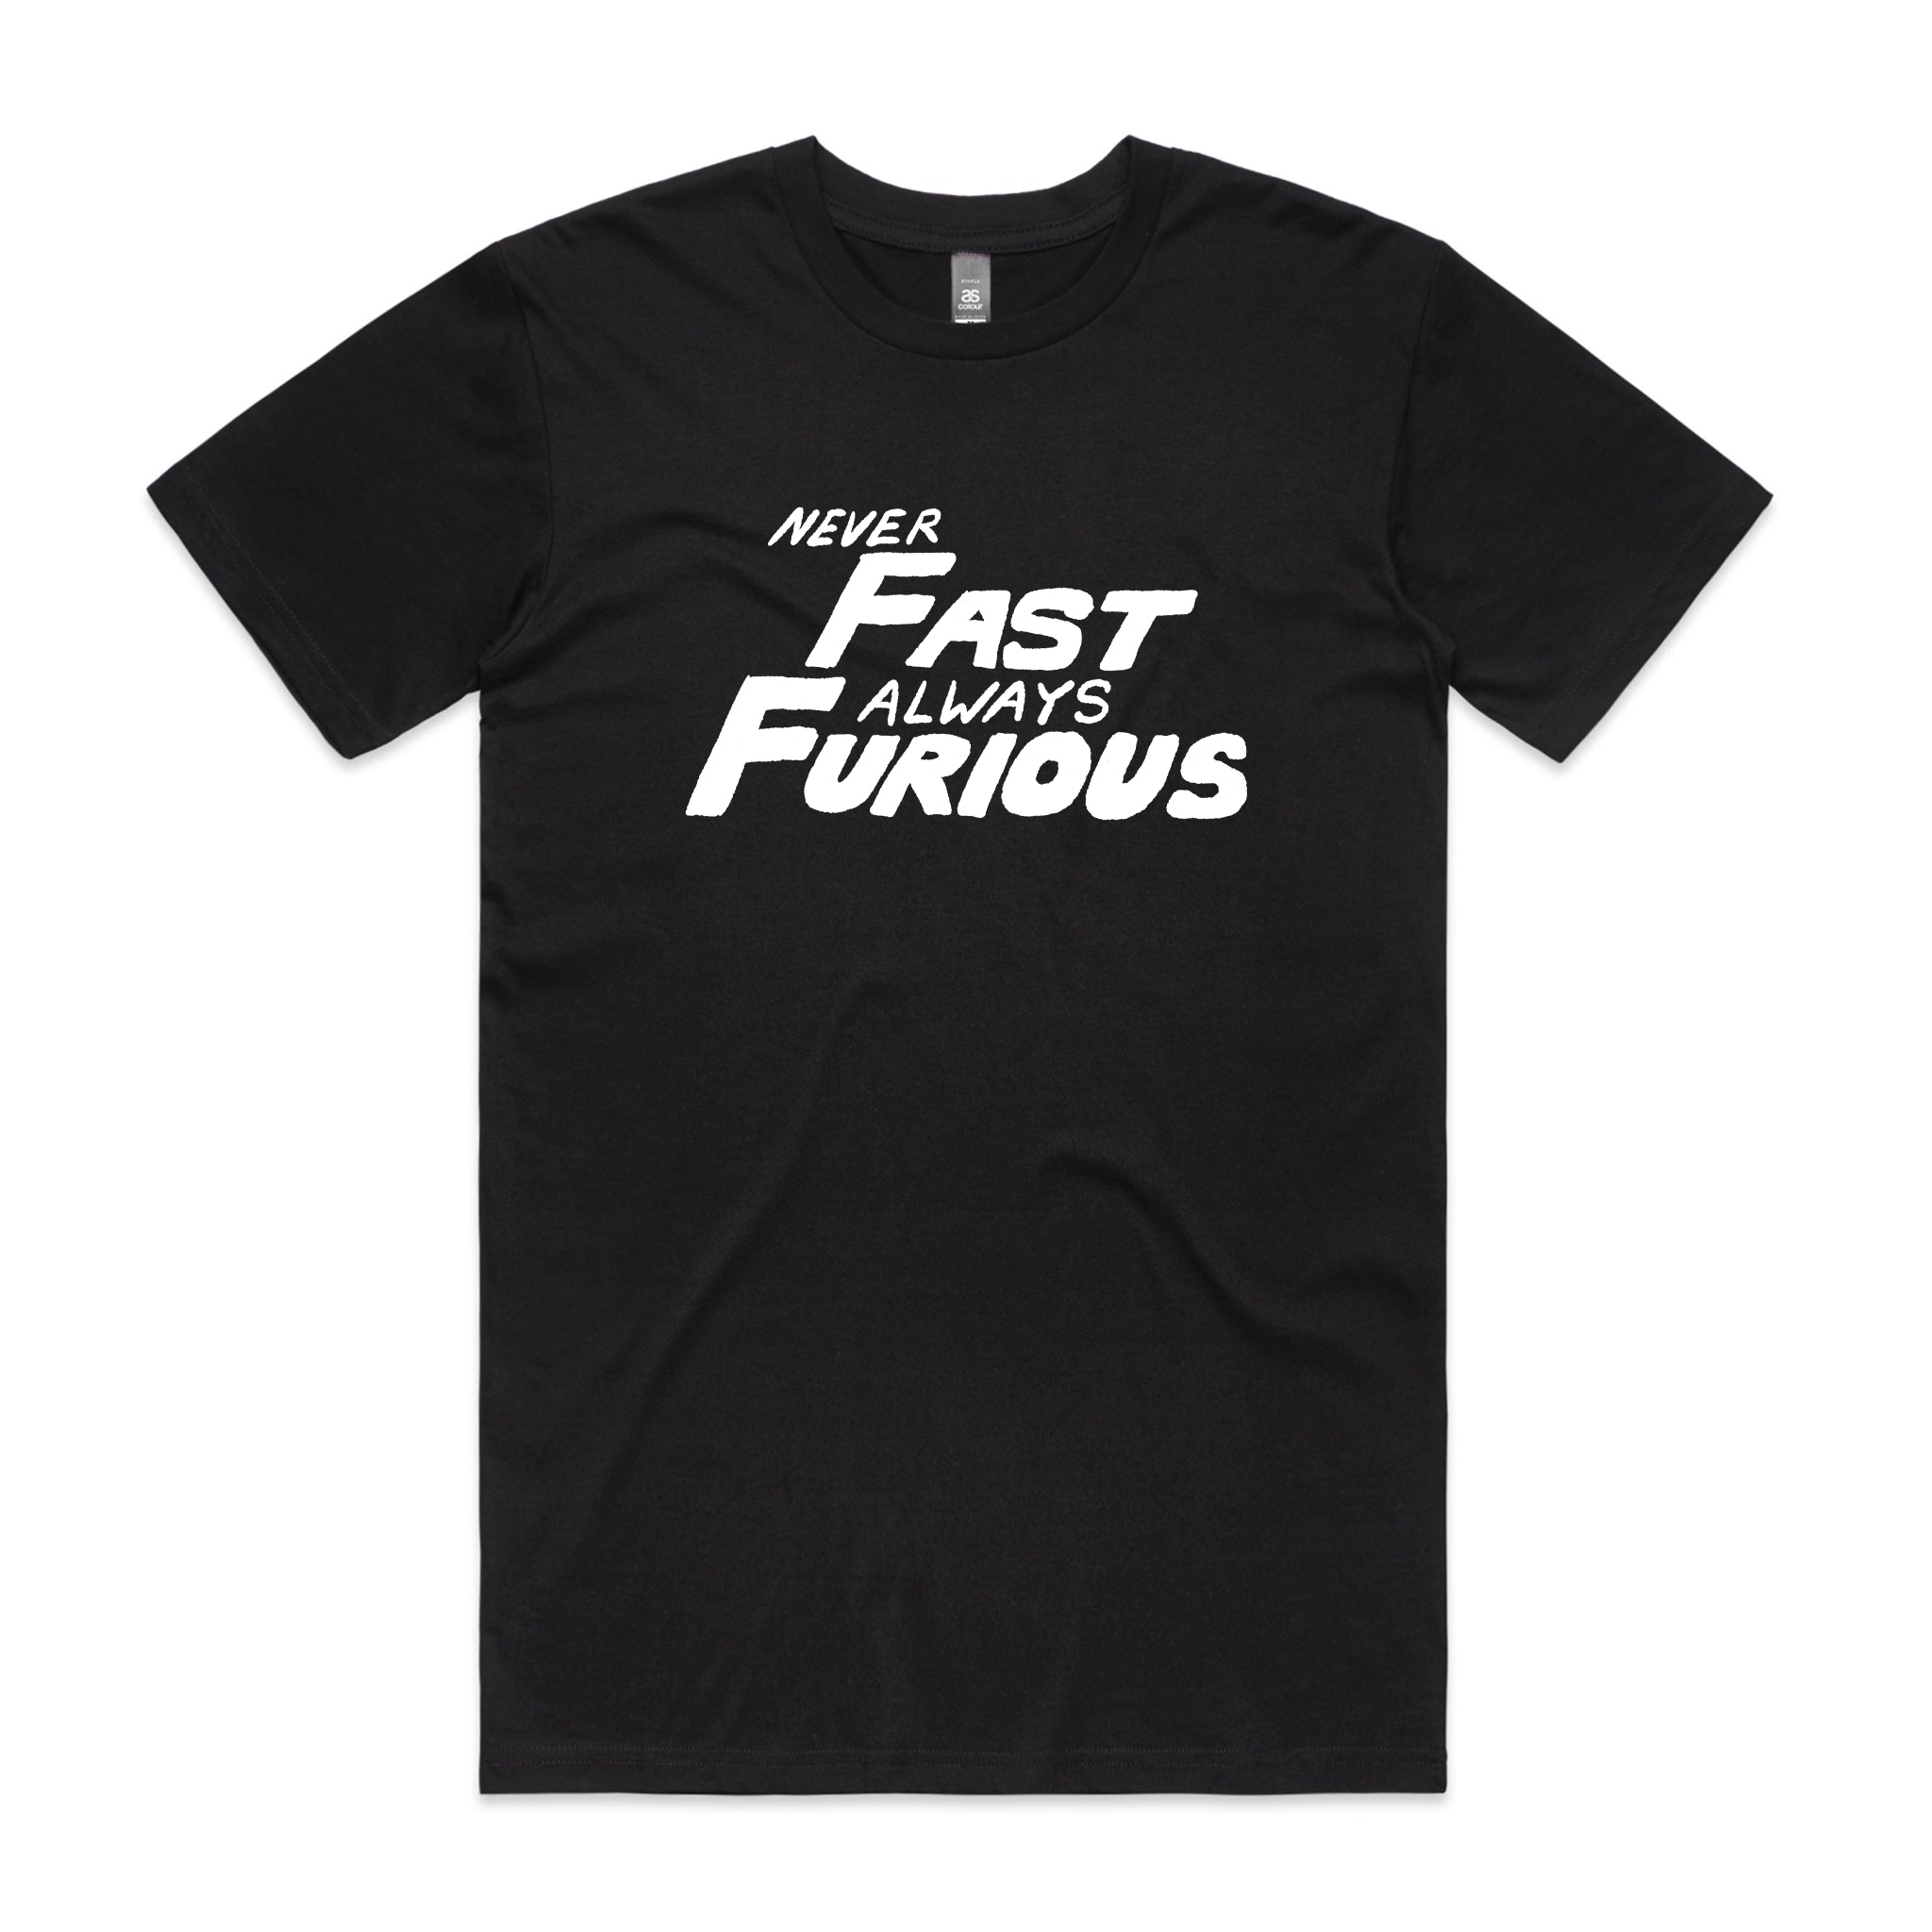 Never Fast Always Furious Tee